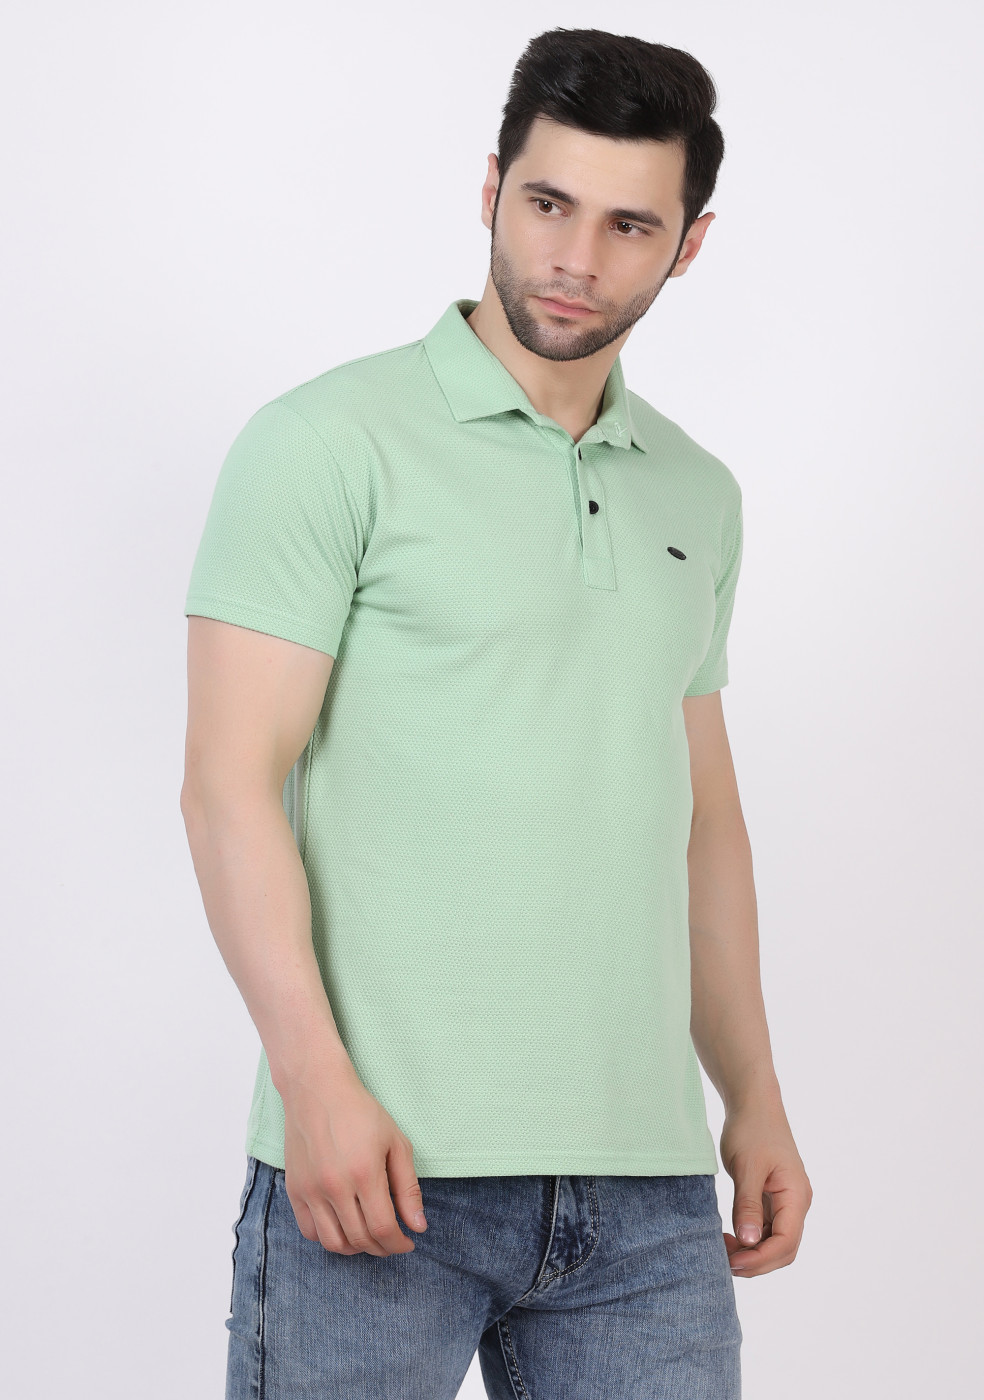 Popcorn Textured Casual Slim Fit Polo T Shirts For Men